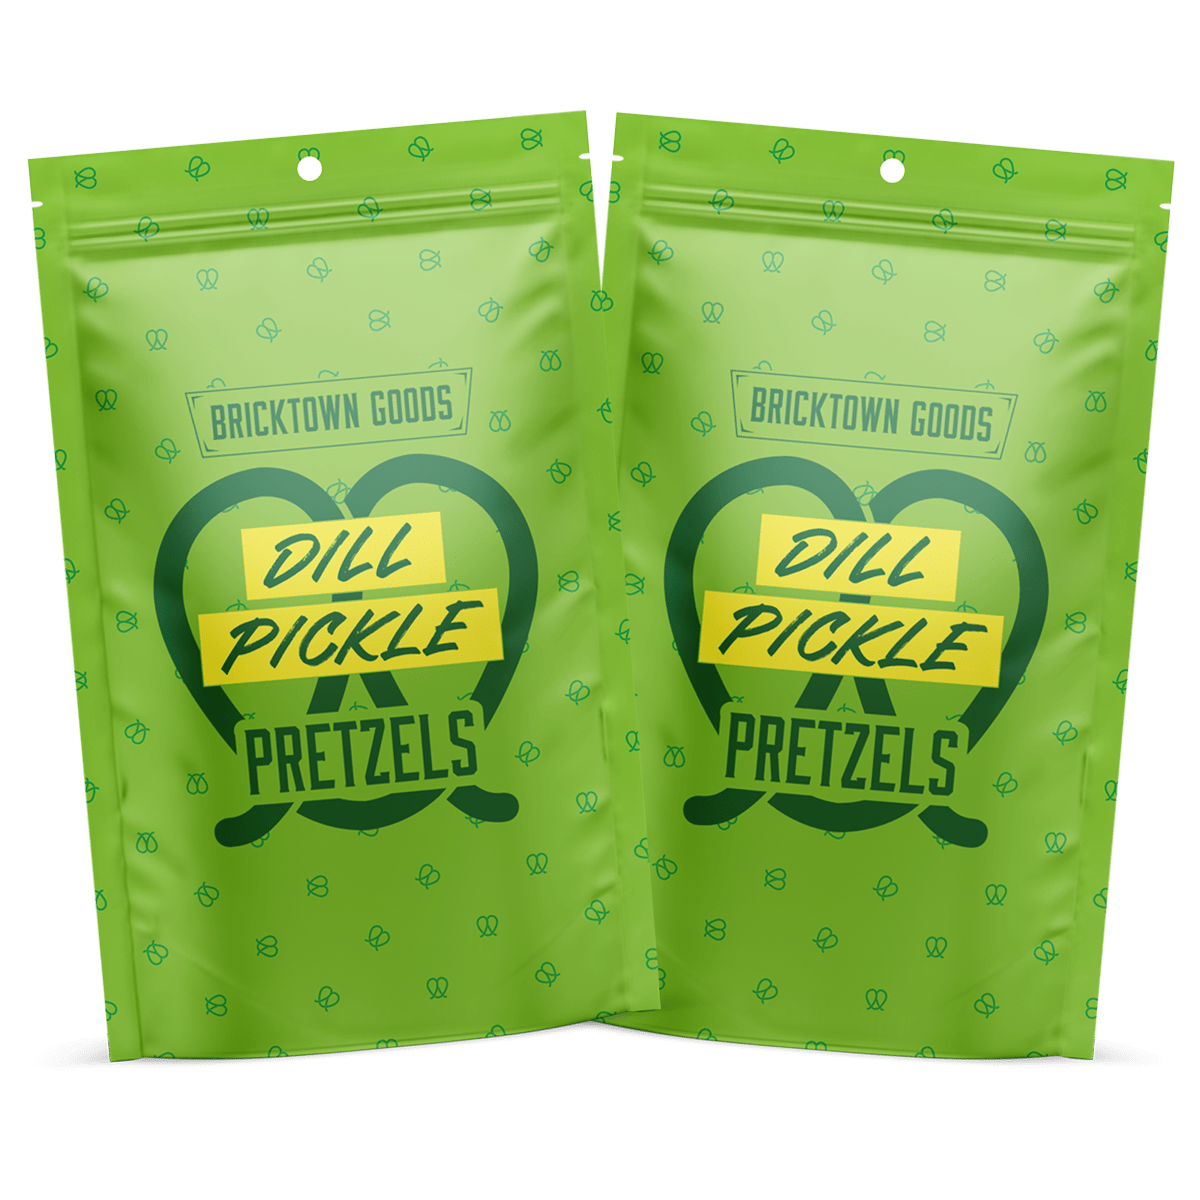 Flavored Pretzels - Dill Pickle by Bricktown Roasters